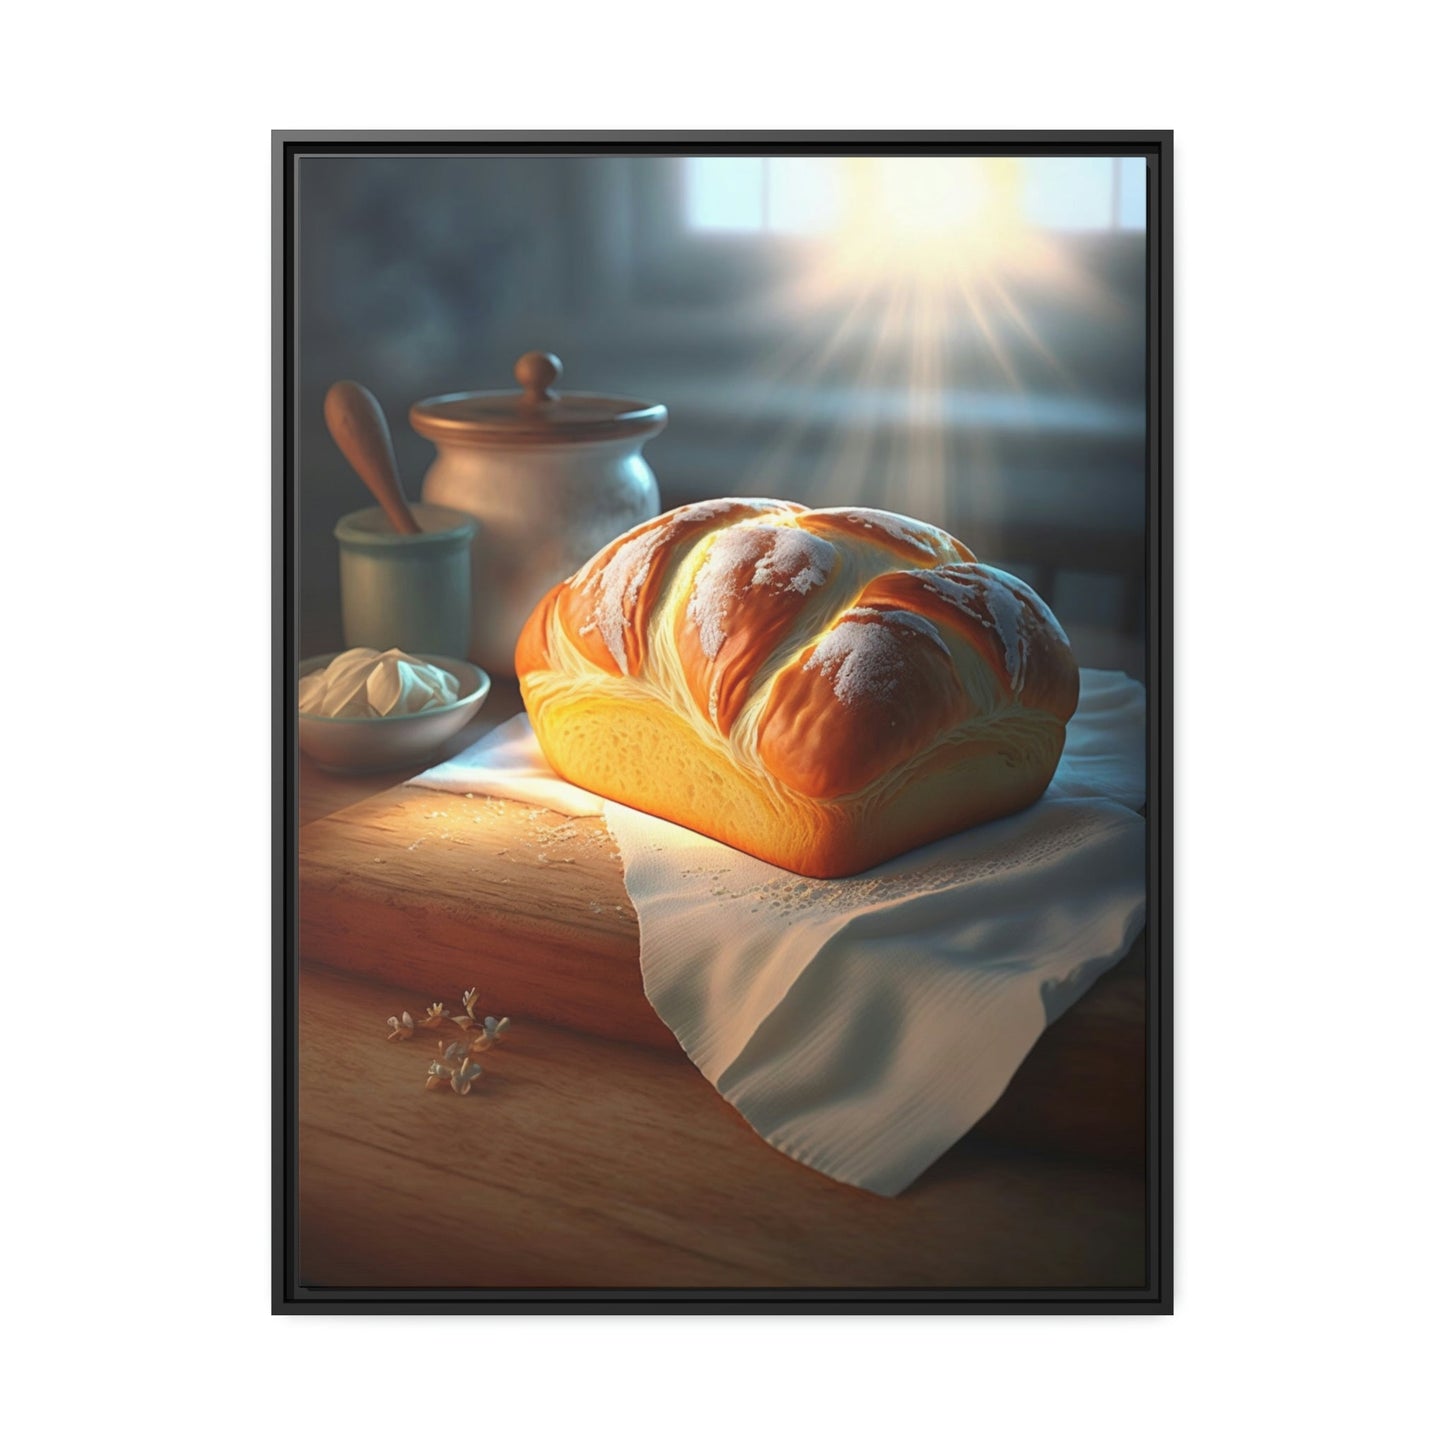 The Daily Bread: Print on Canvas and Art for Kitchen Decor